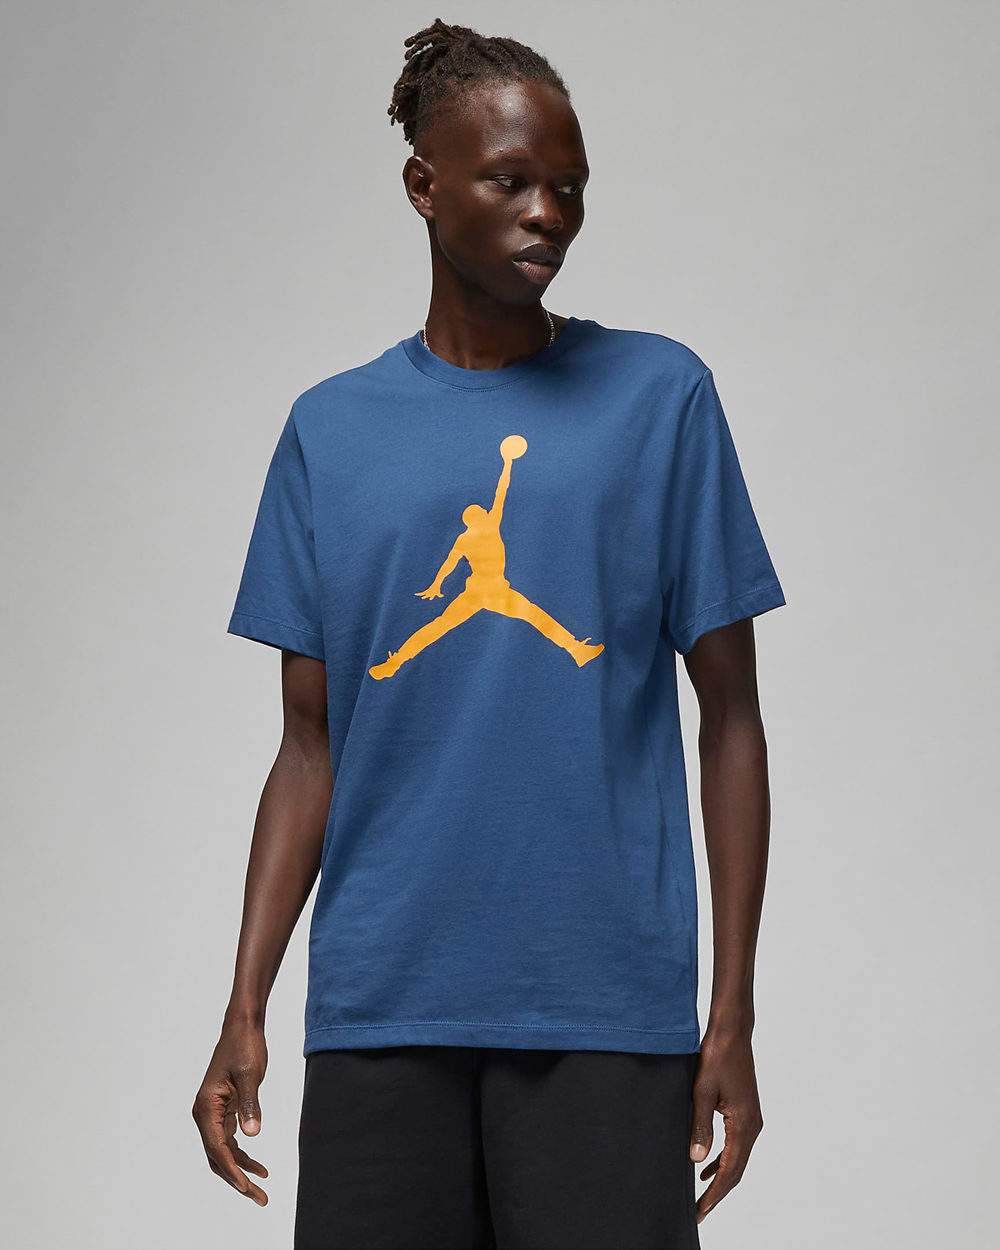 Shirts for the Air Jordan 13 French Blue